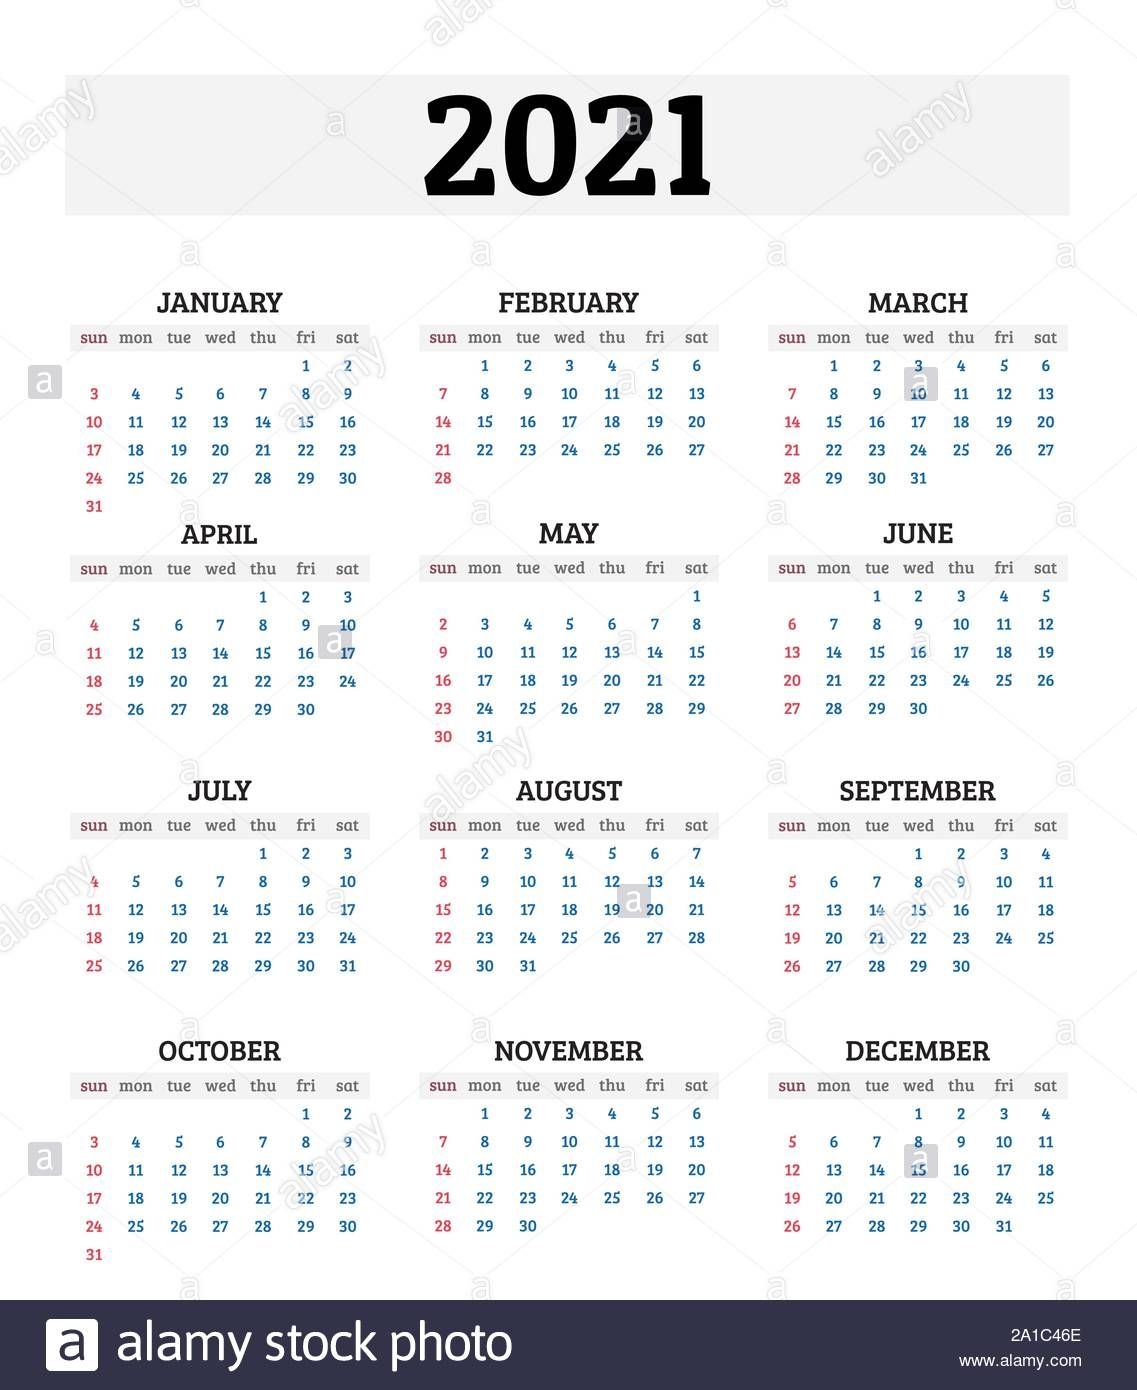 Annual Calendar High Resolution Stock Photography And Images